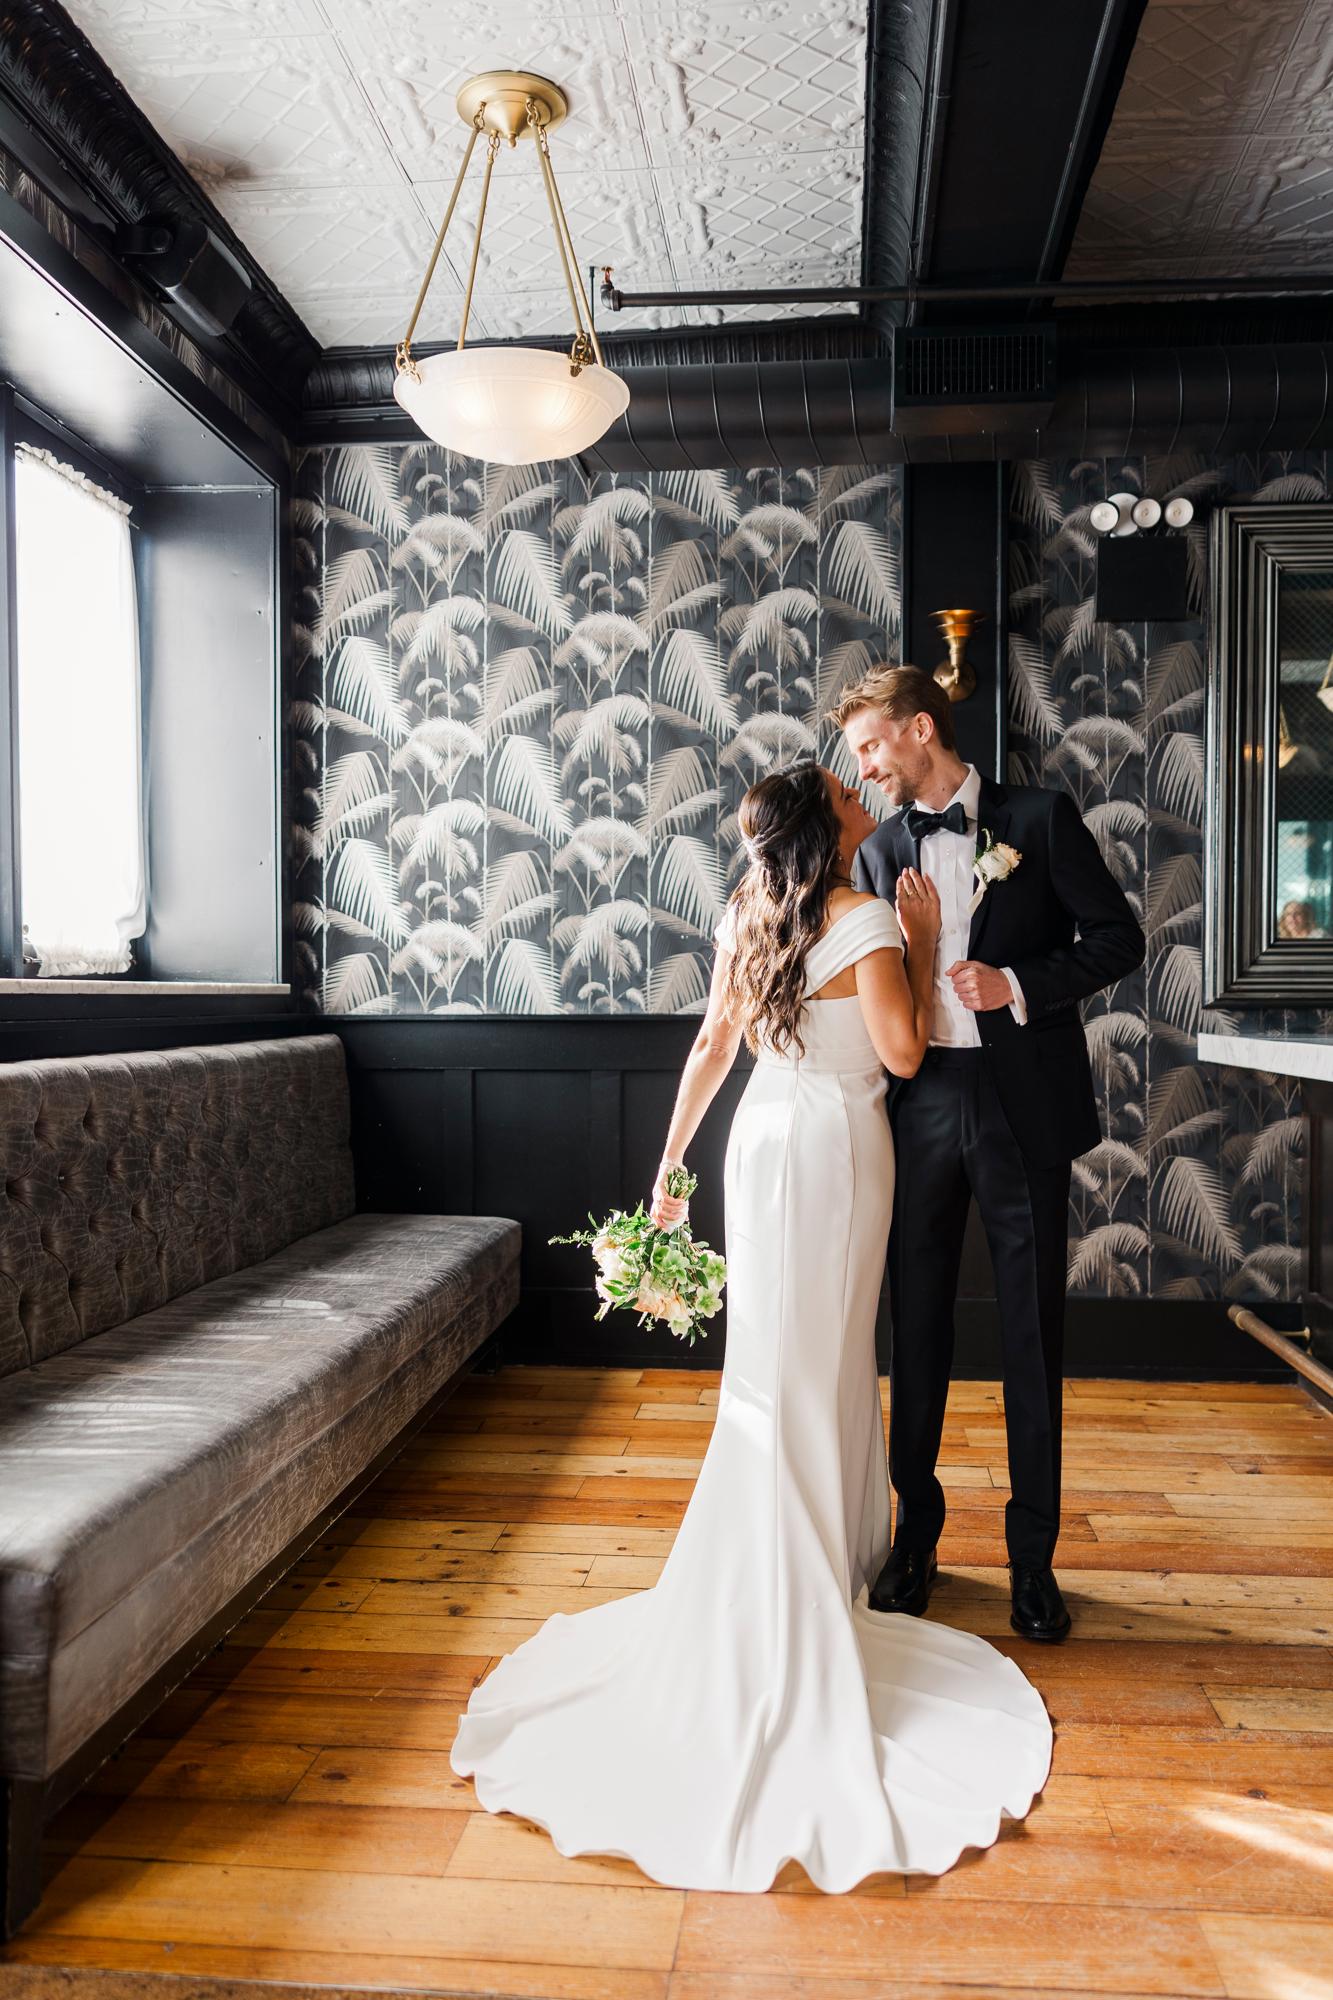 Special Wedding at 501 Union in NYC